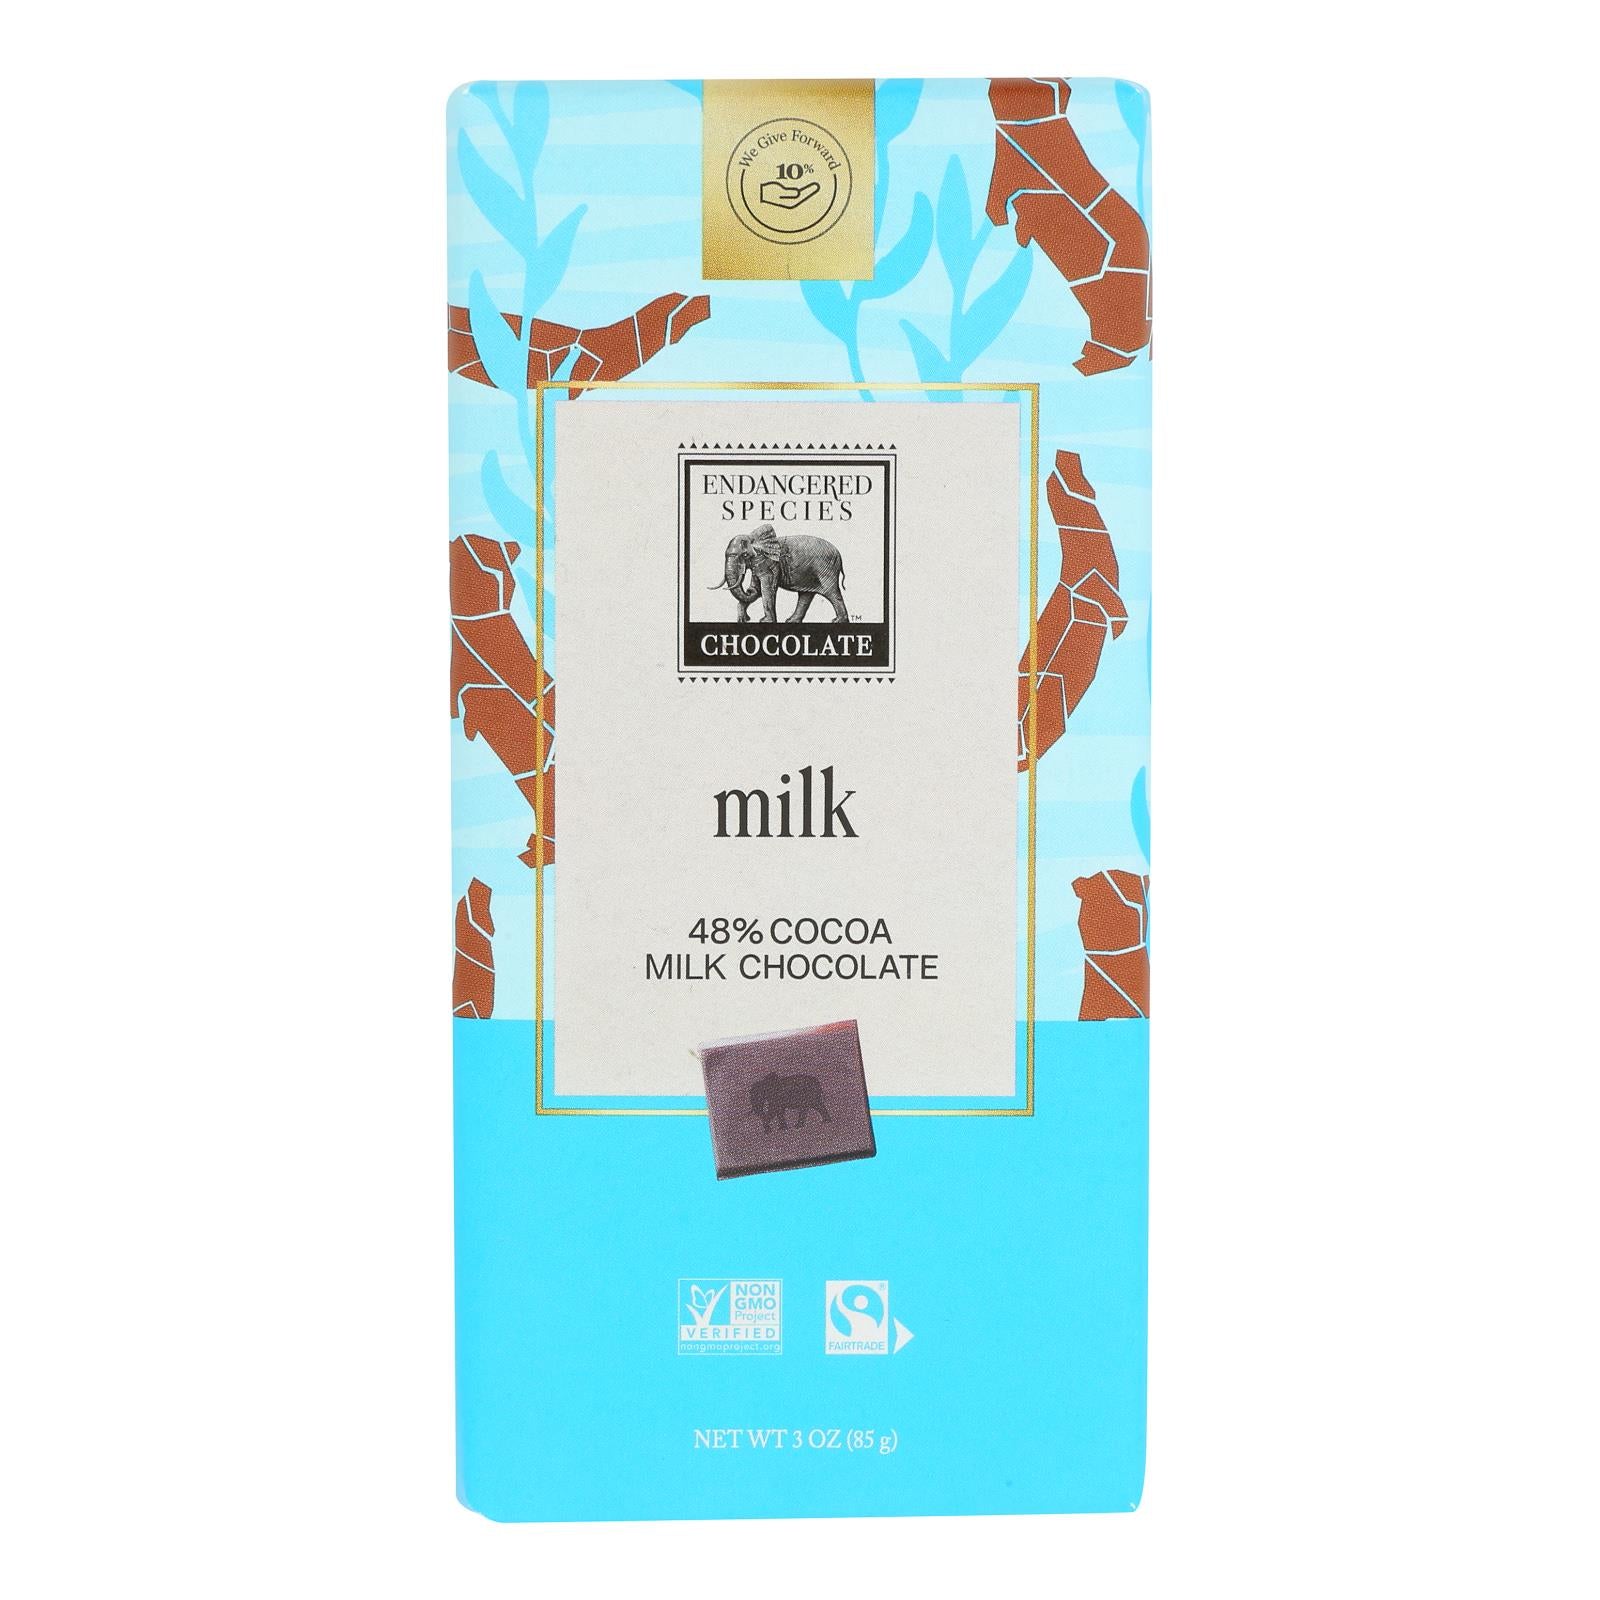 Endangered Species Natural Chocolate Bars - Milk Chocolate - 48 Percent Cocoa - 3 oz Bars - Case of 12